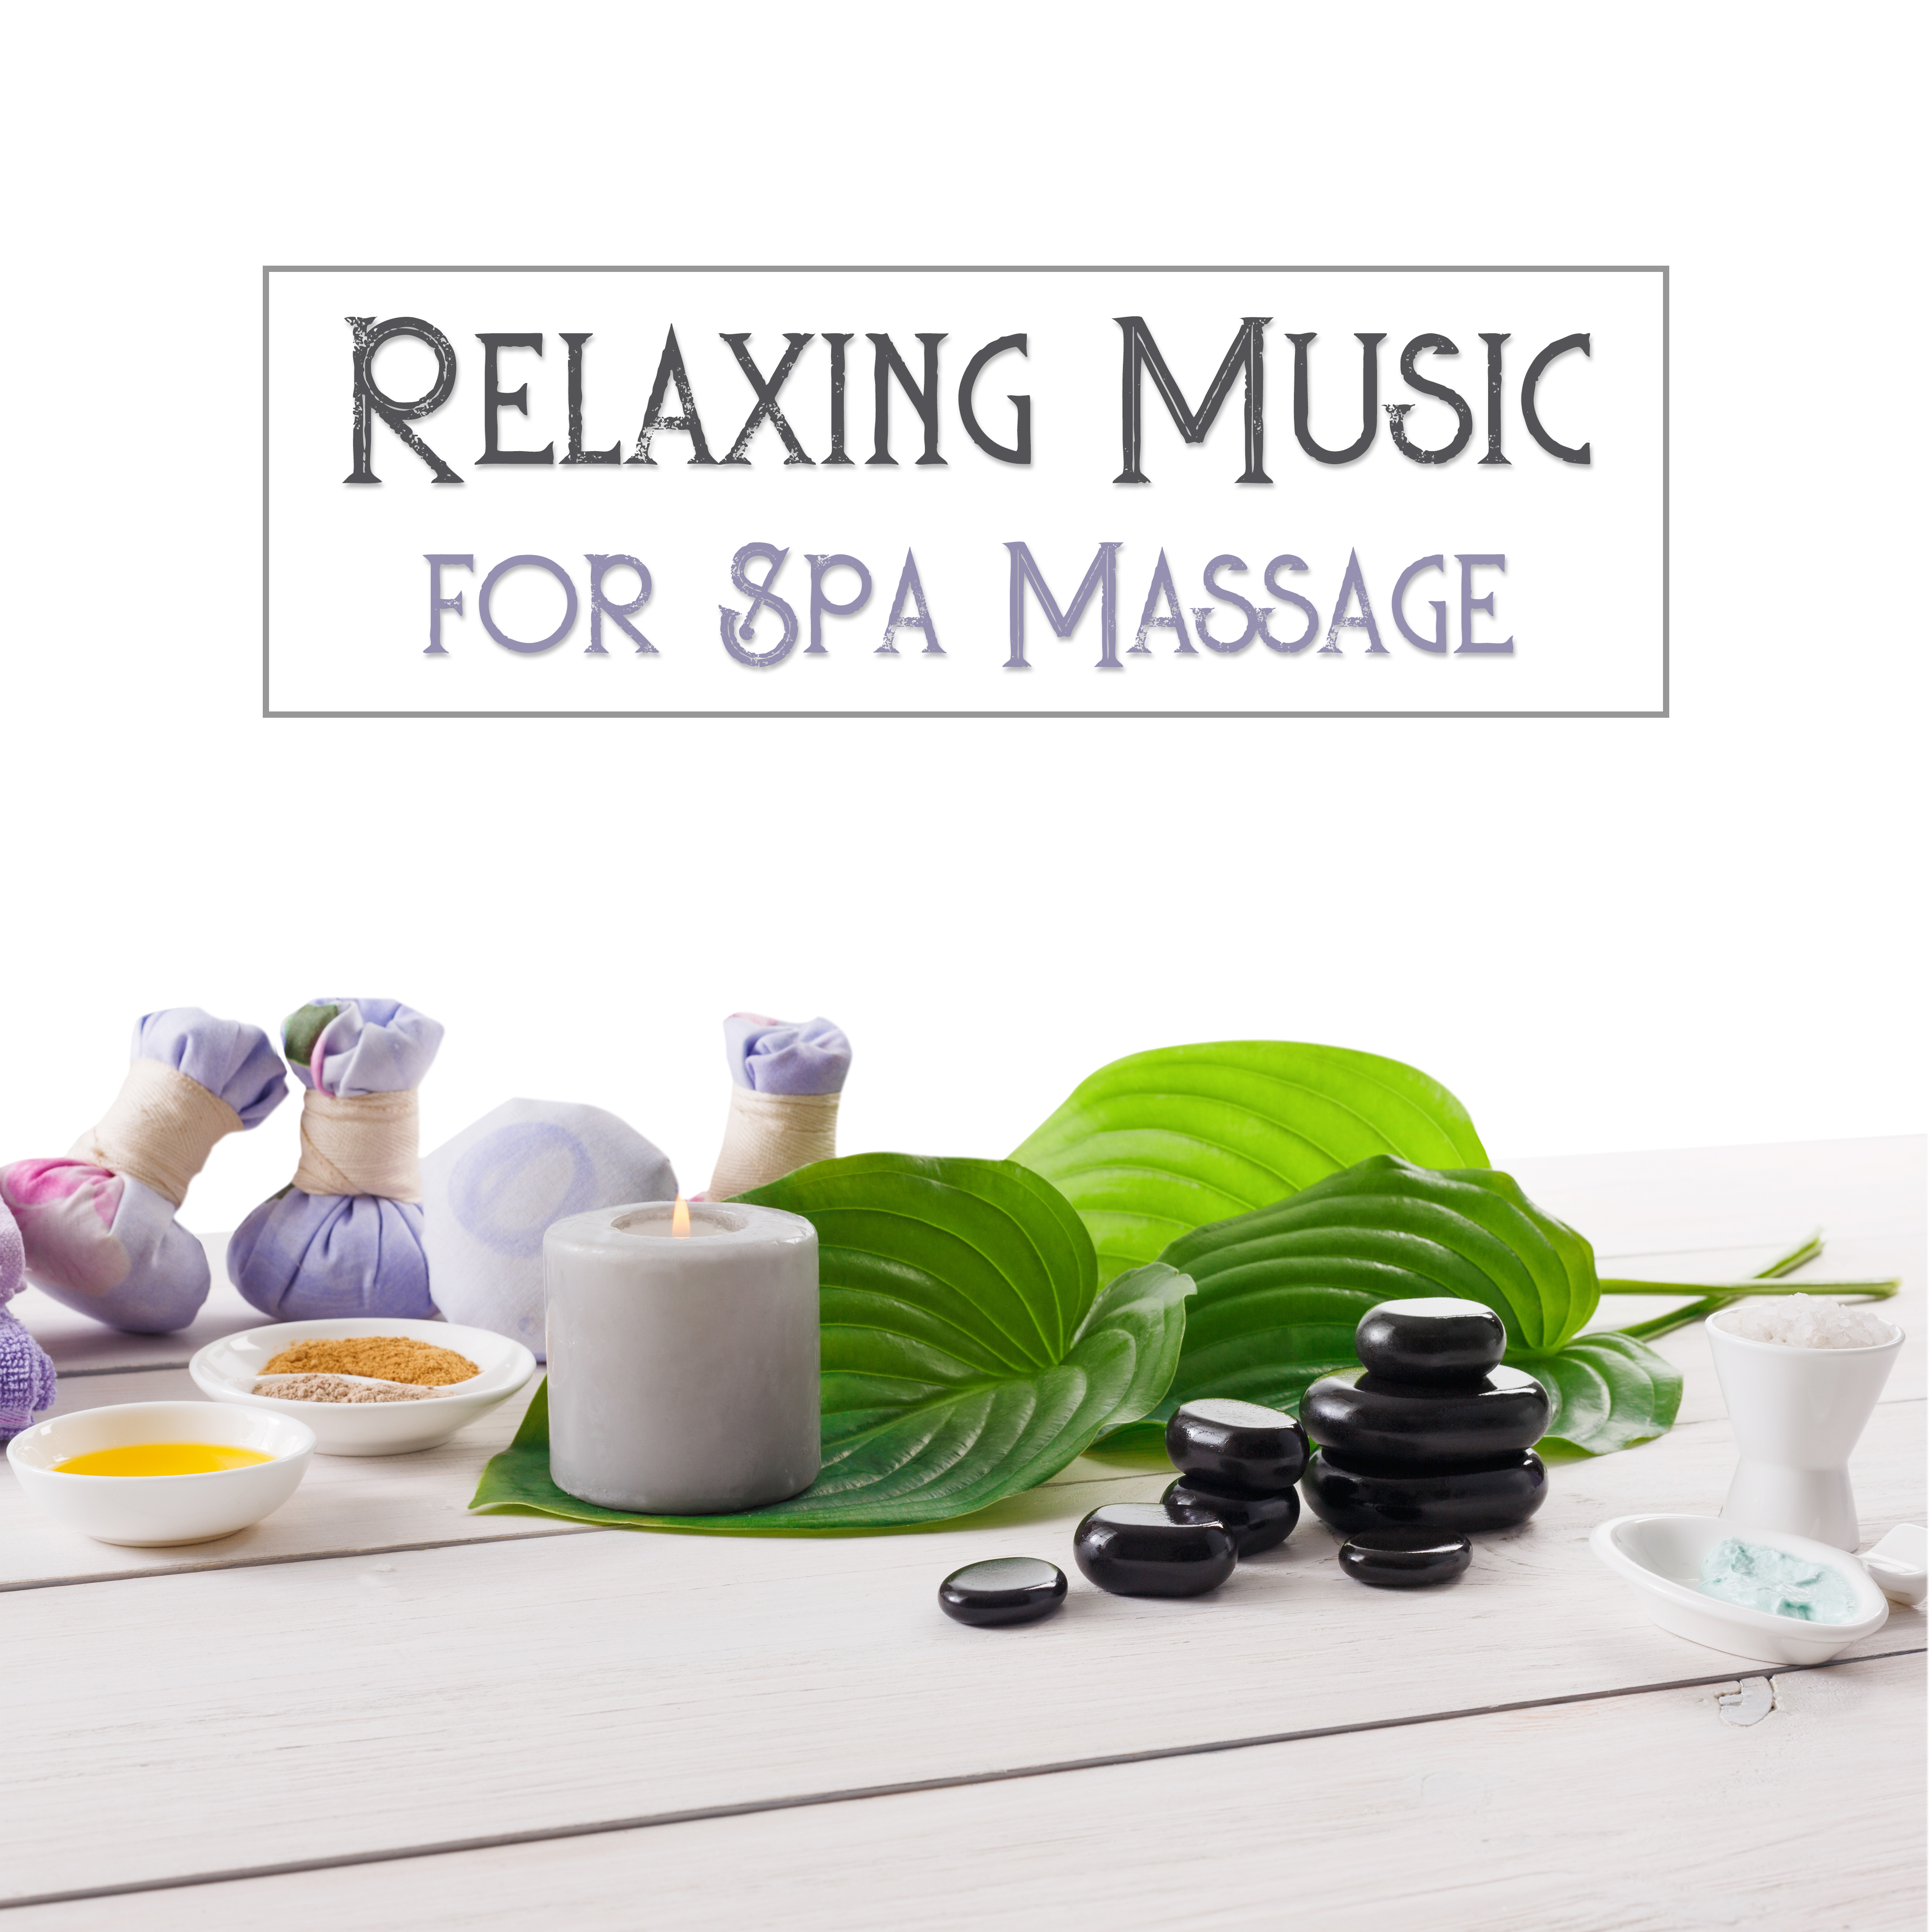 Relaxing Music for Spa Massage